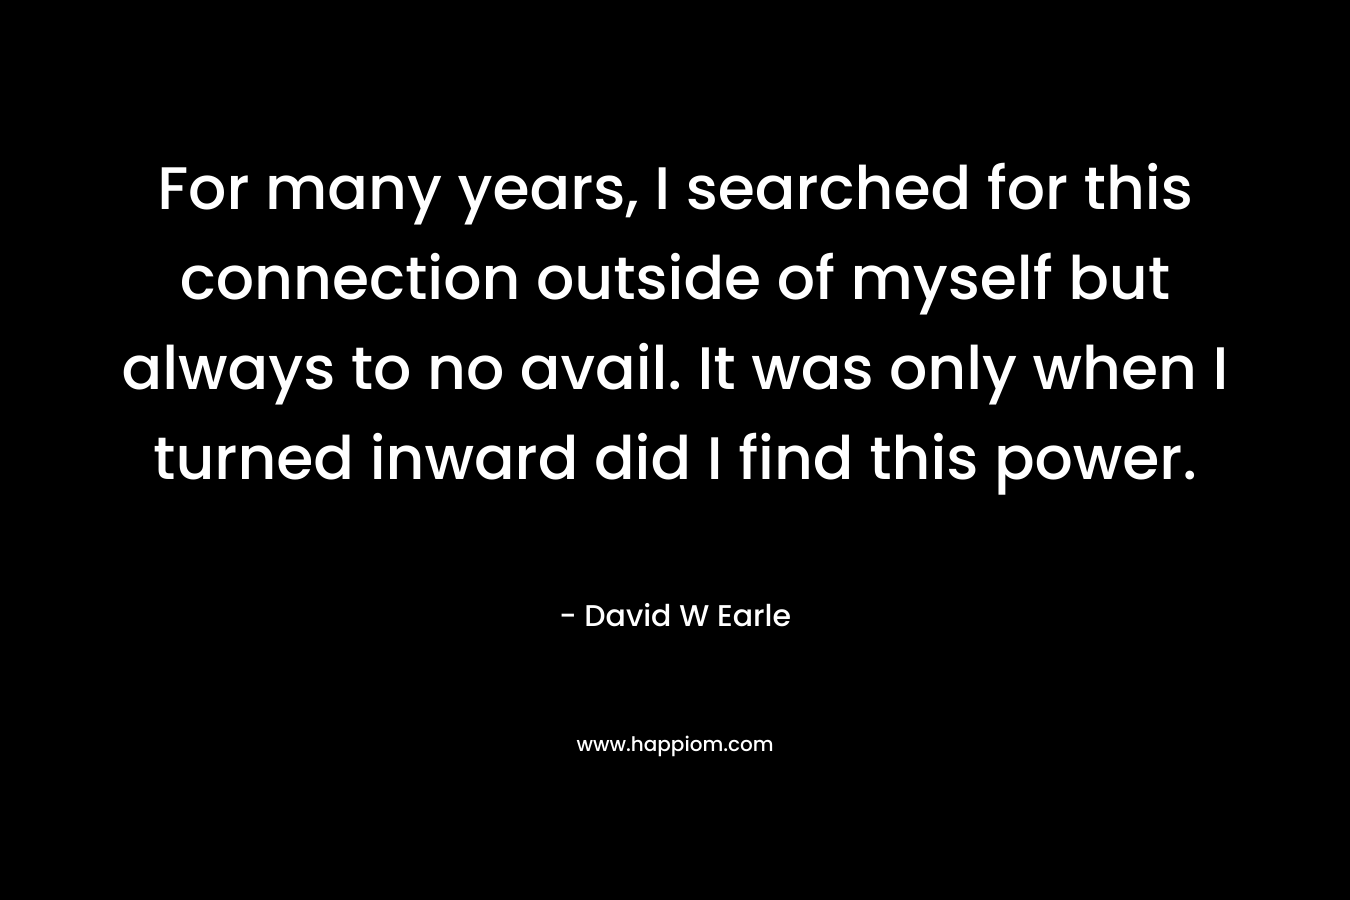 For many years, I searched for this connection outside of myself but always to no avail. It was only when I turned inward did I find this power.